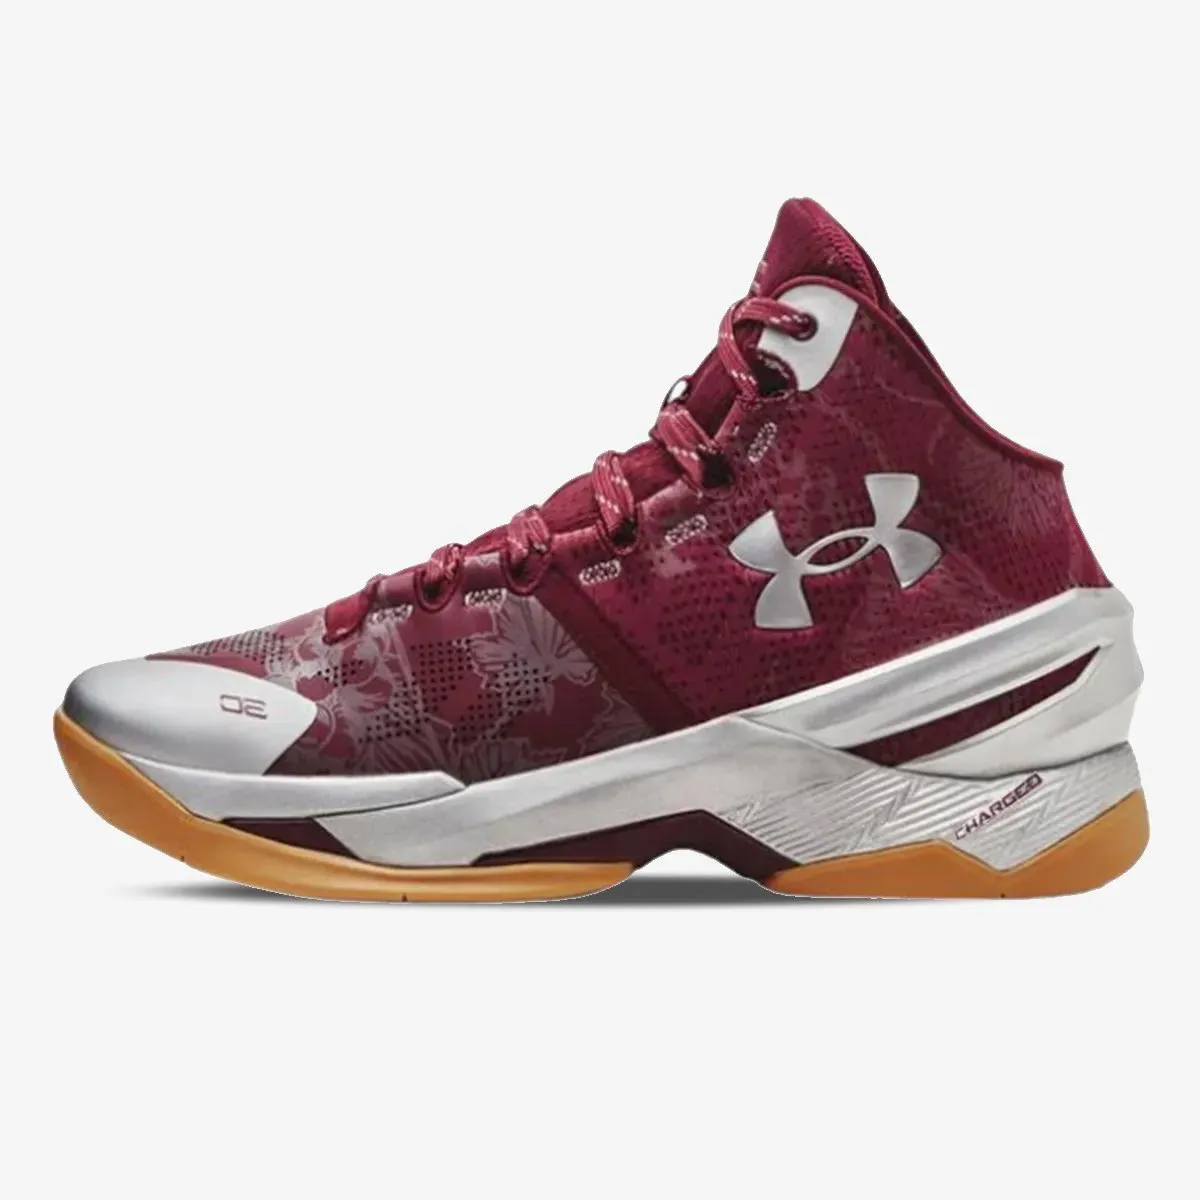 Under Armour Curry S 